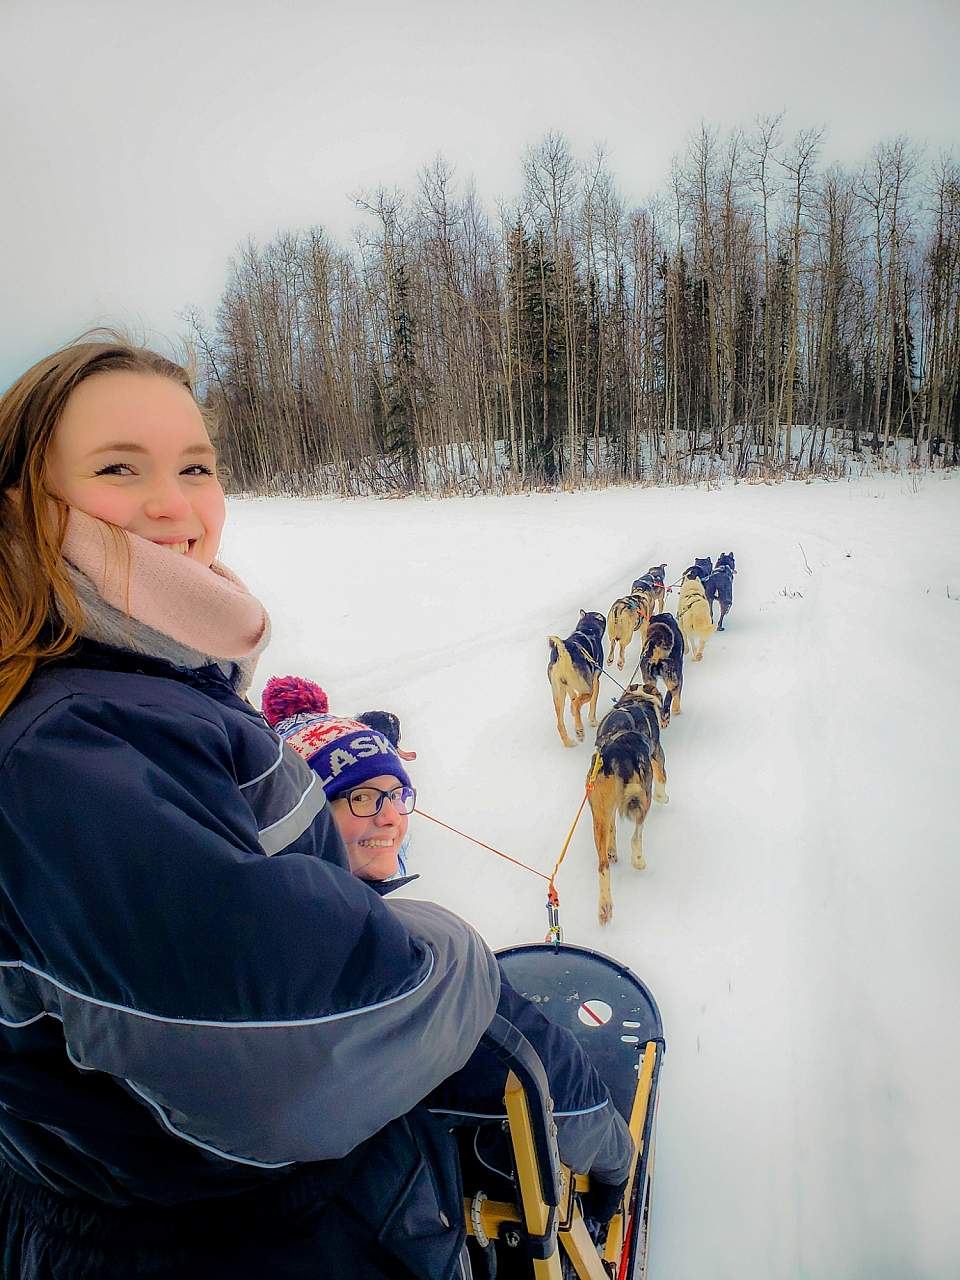 Two visitors try out driving a team of sled dogs through the snow.